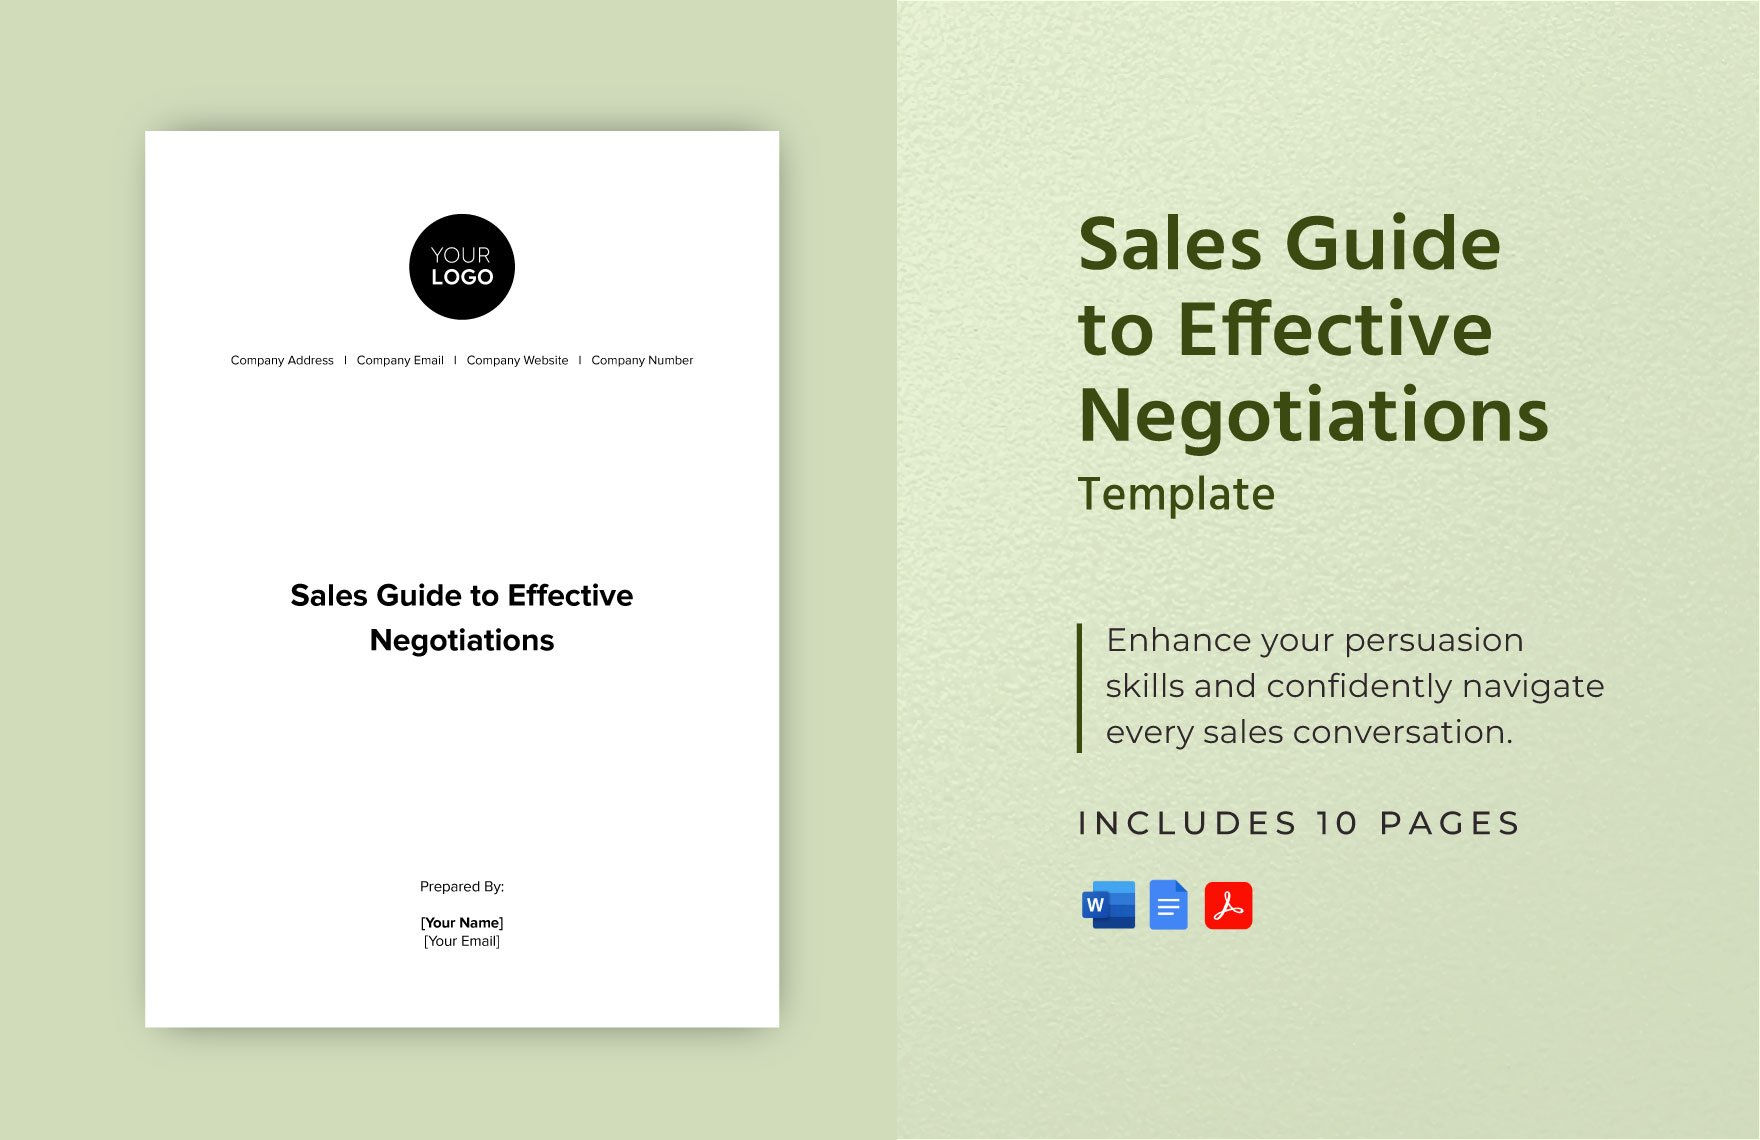 Sales Guide to Effective Negotiations Template